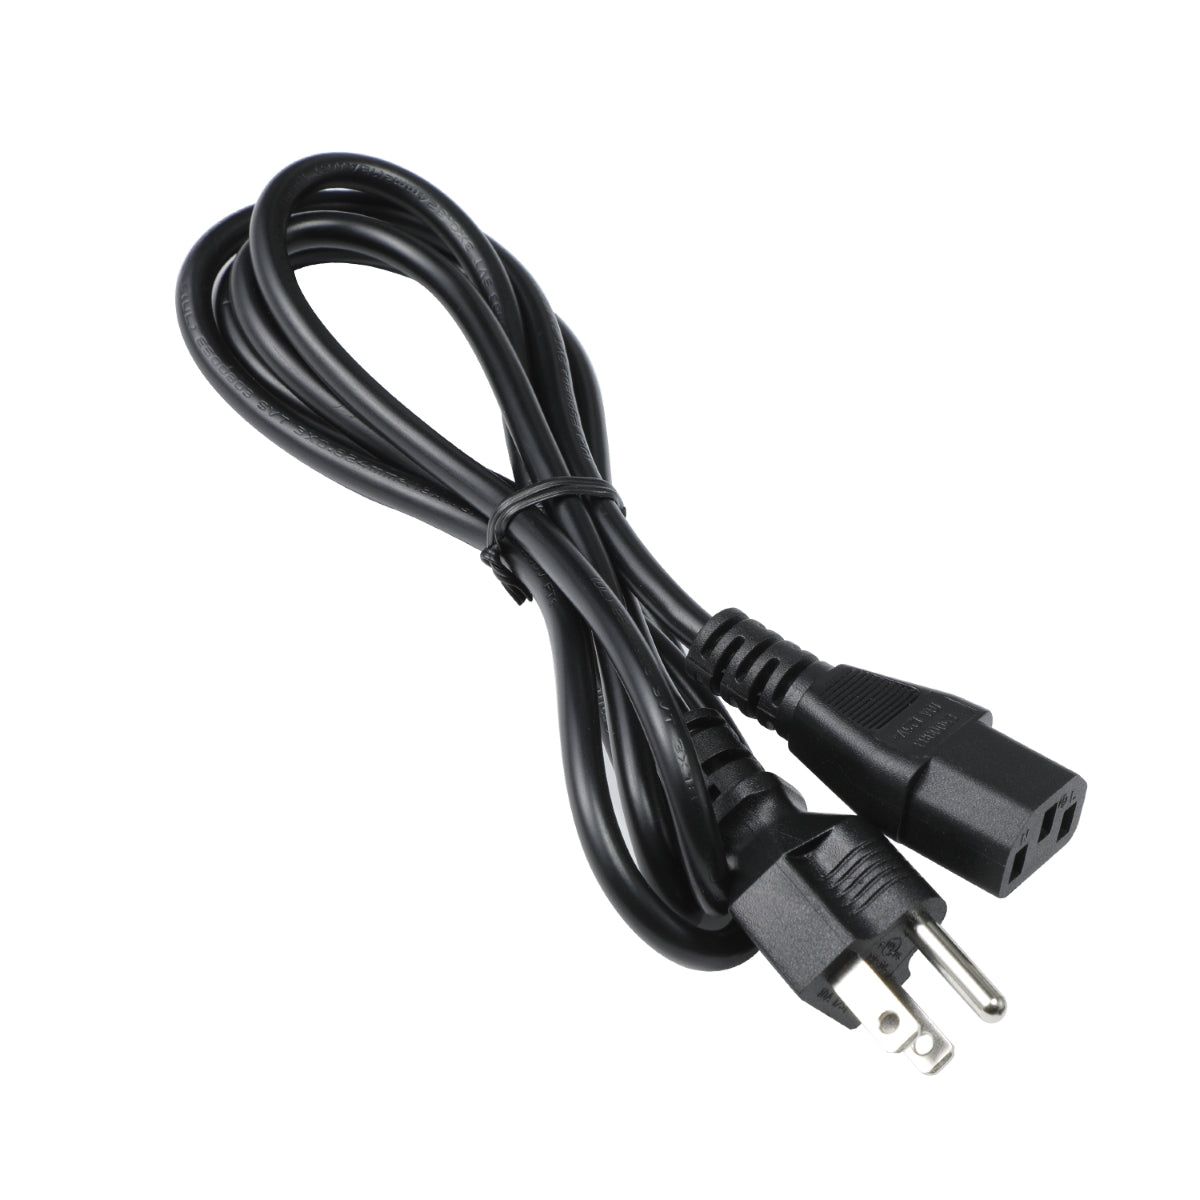 Power Cable for Philips 329P1HTAA Monitor.